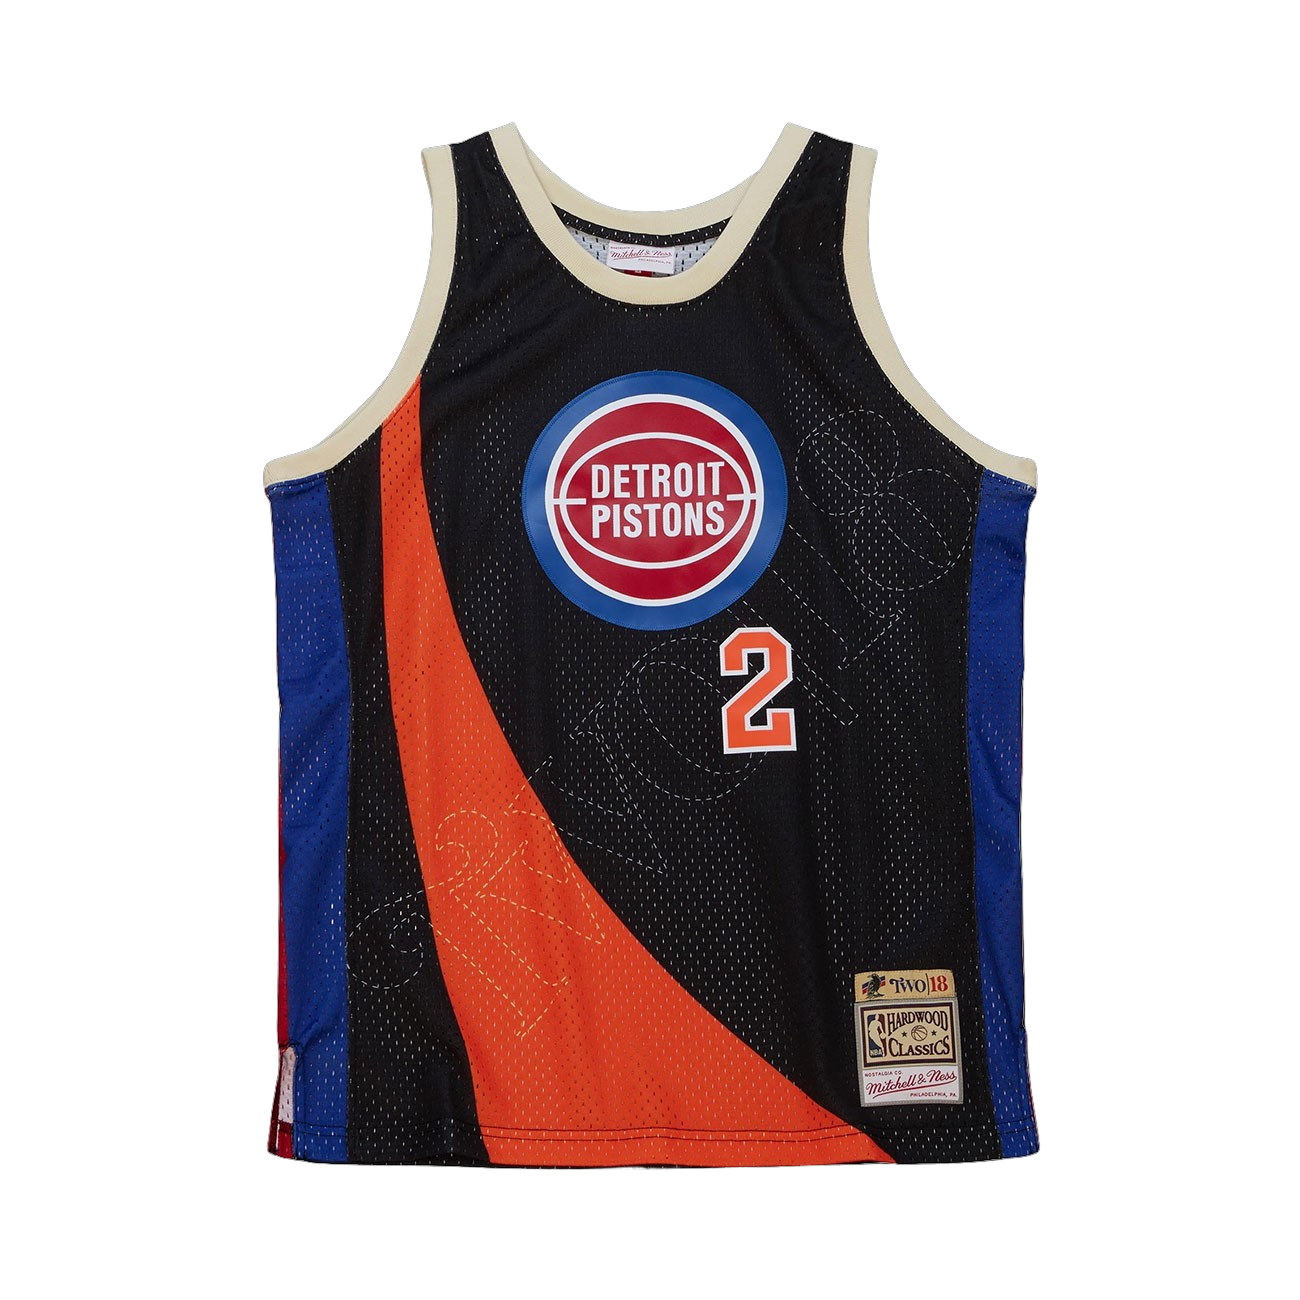 Two18 Partners with Mitchell & Ness on Pistons Collection - Hour